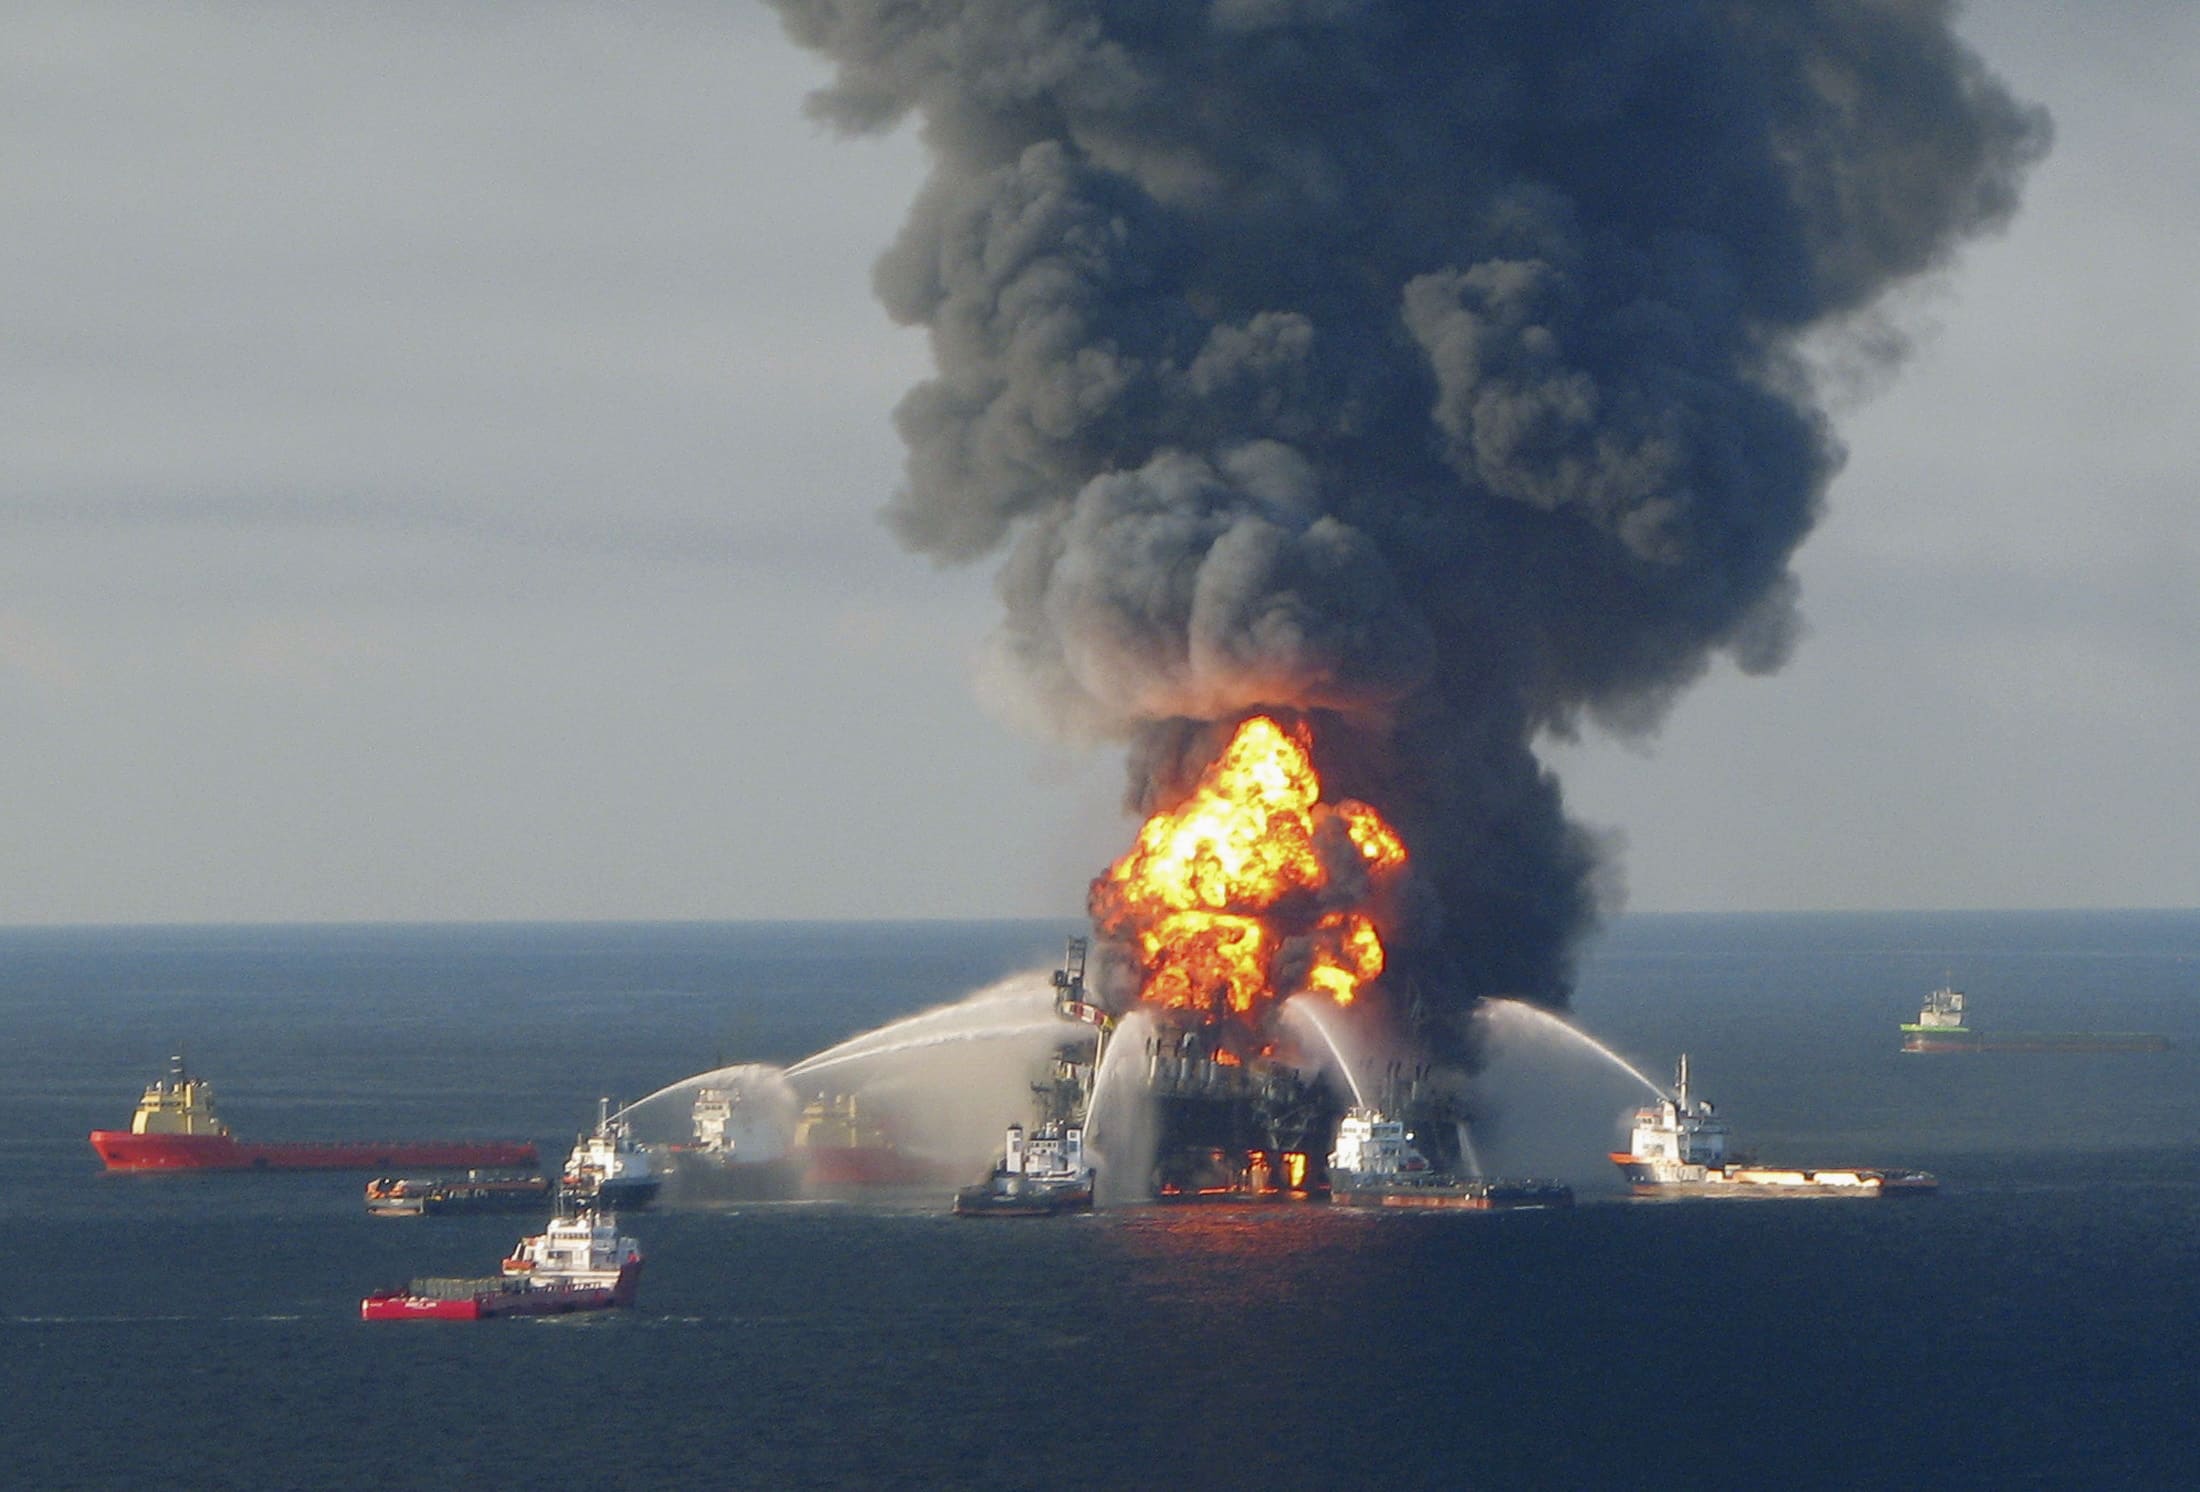 Offshore Oil Rig Disaster